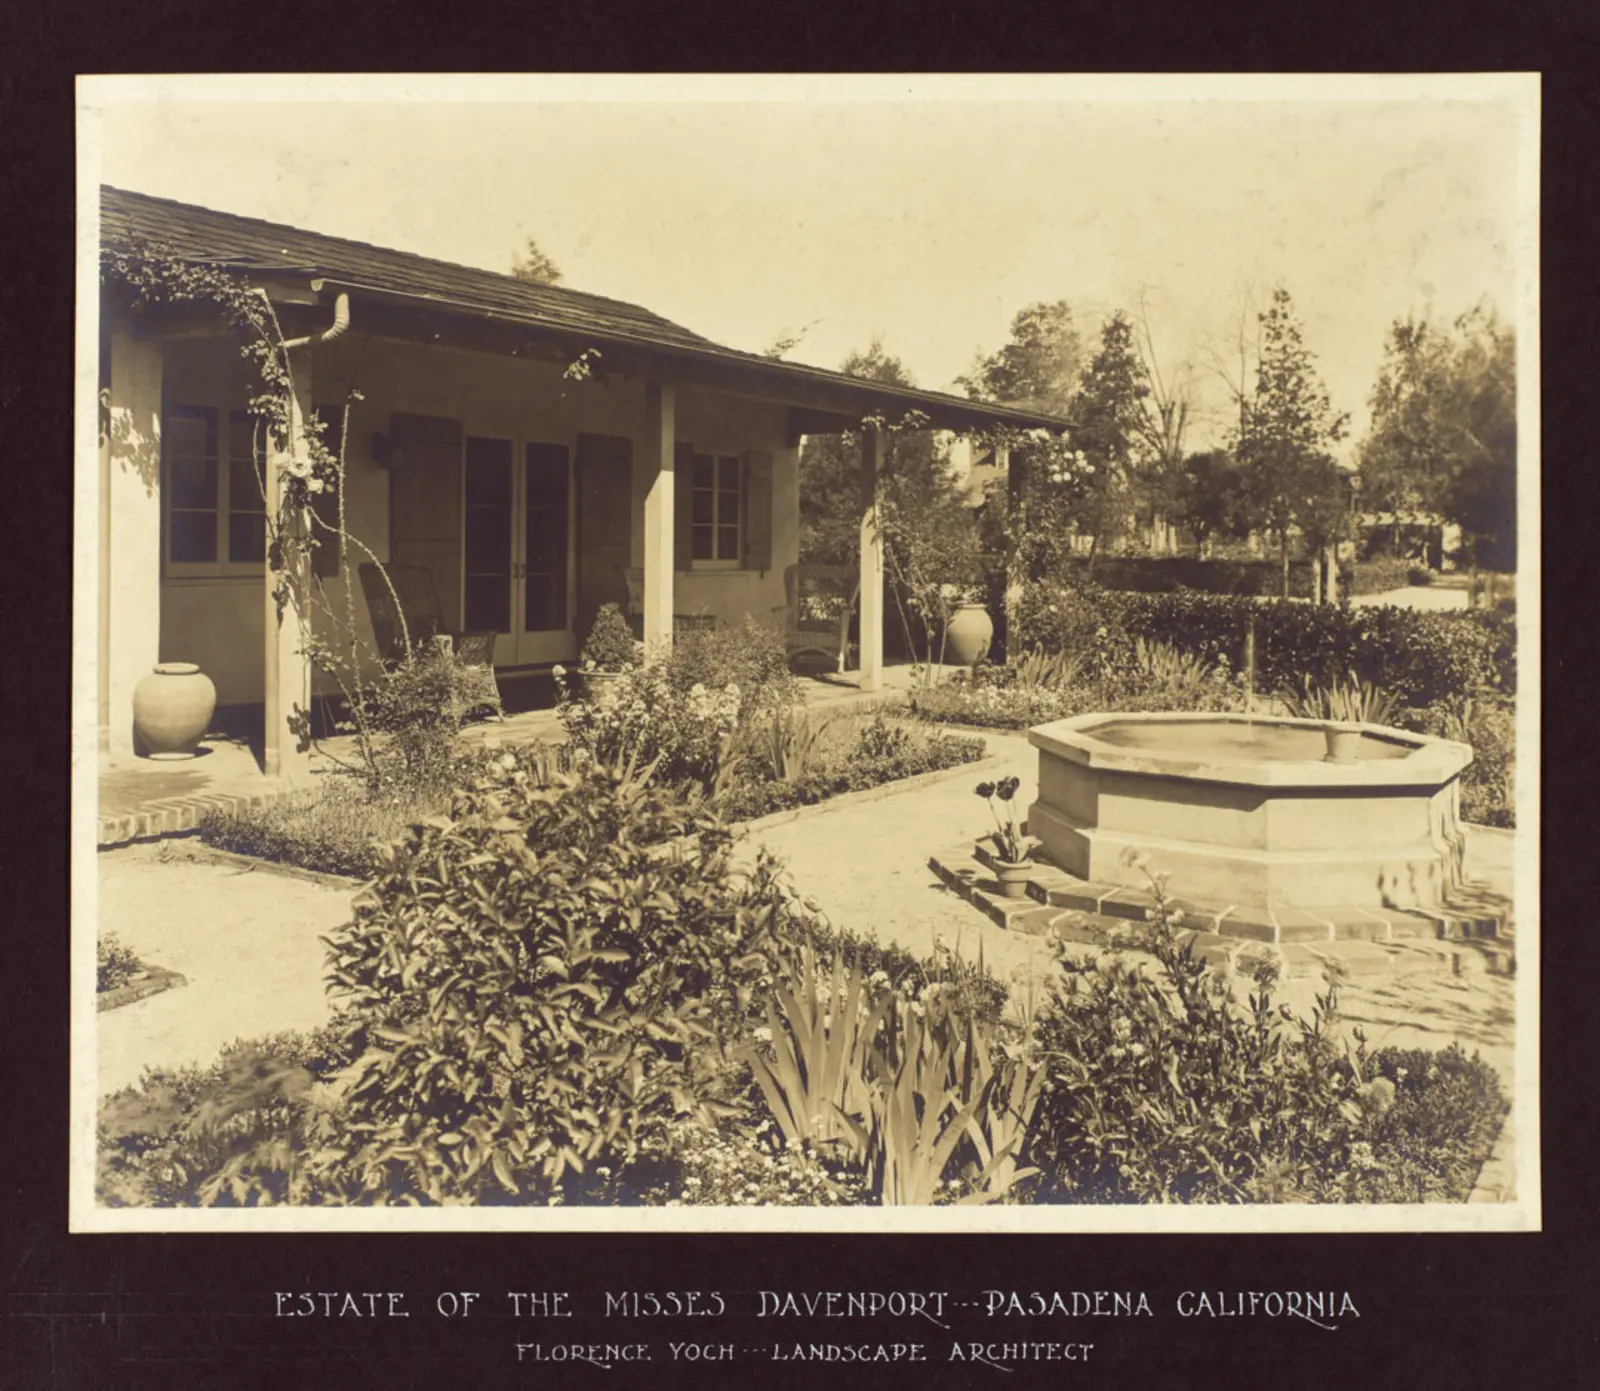 A portfolio page with a sepia-tone photo of a home garden. Text below reads “Estate of the Misses Davenport --- Pasadena California. Florence Yoch --- Landscape Architect.”